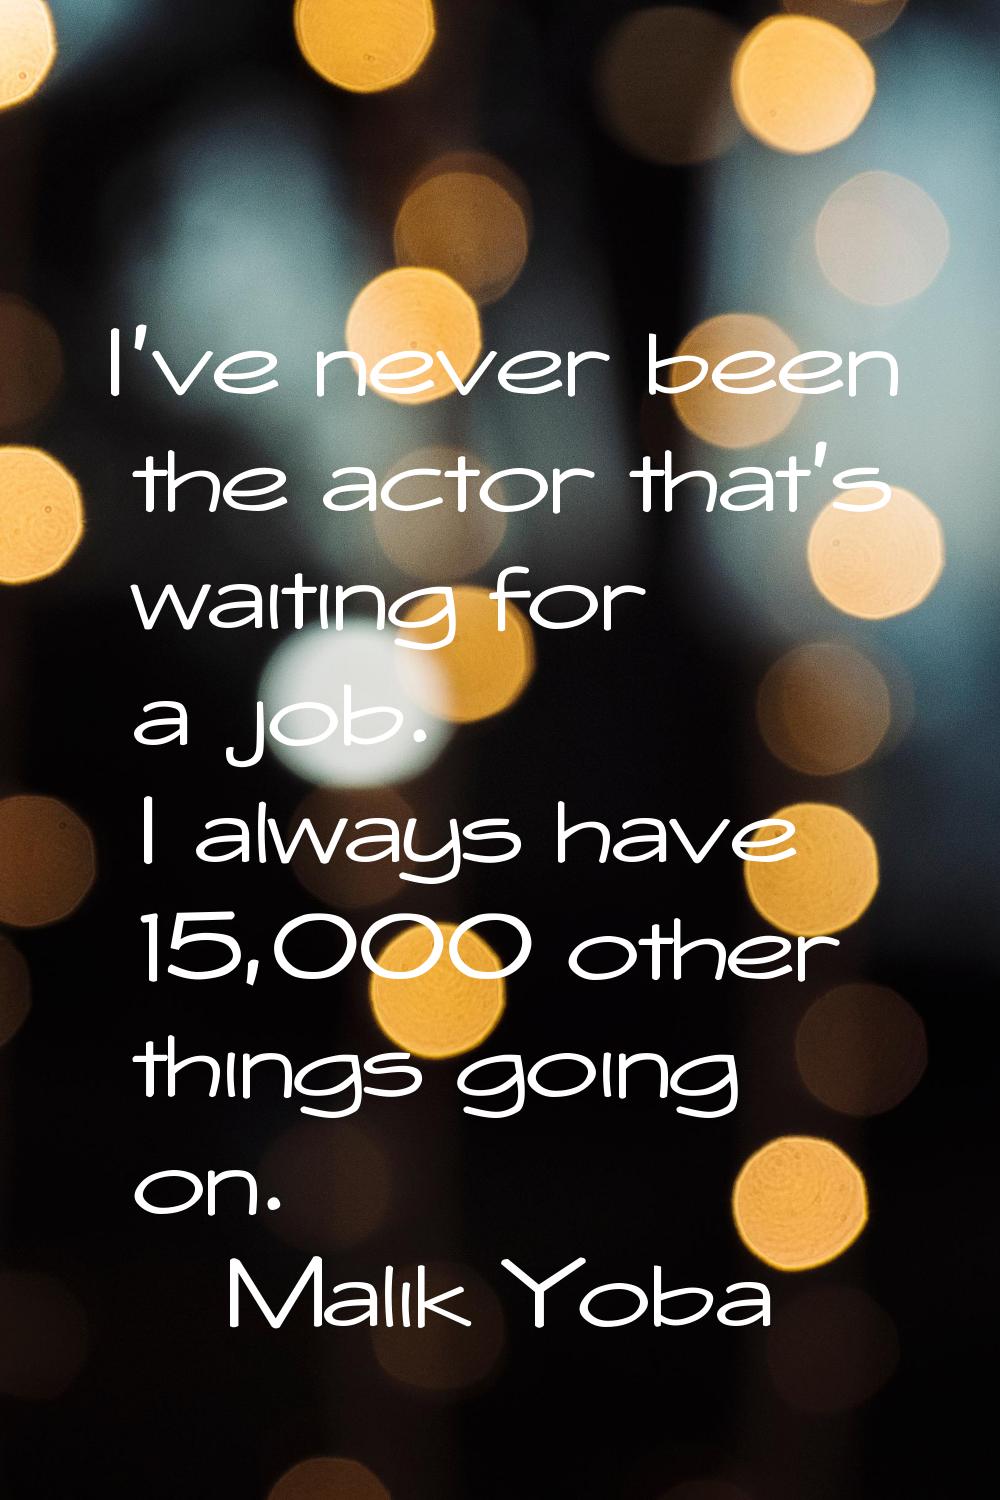 I've never been the actor that's waiting for a job. I always have 15,000 other things going on.